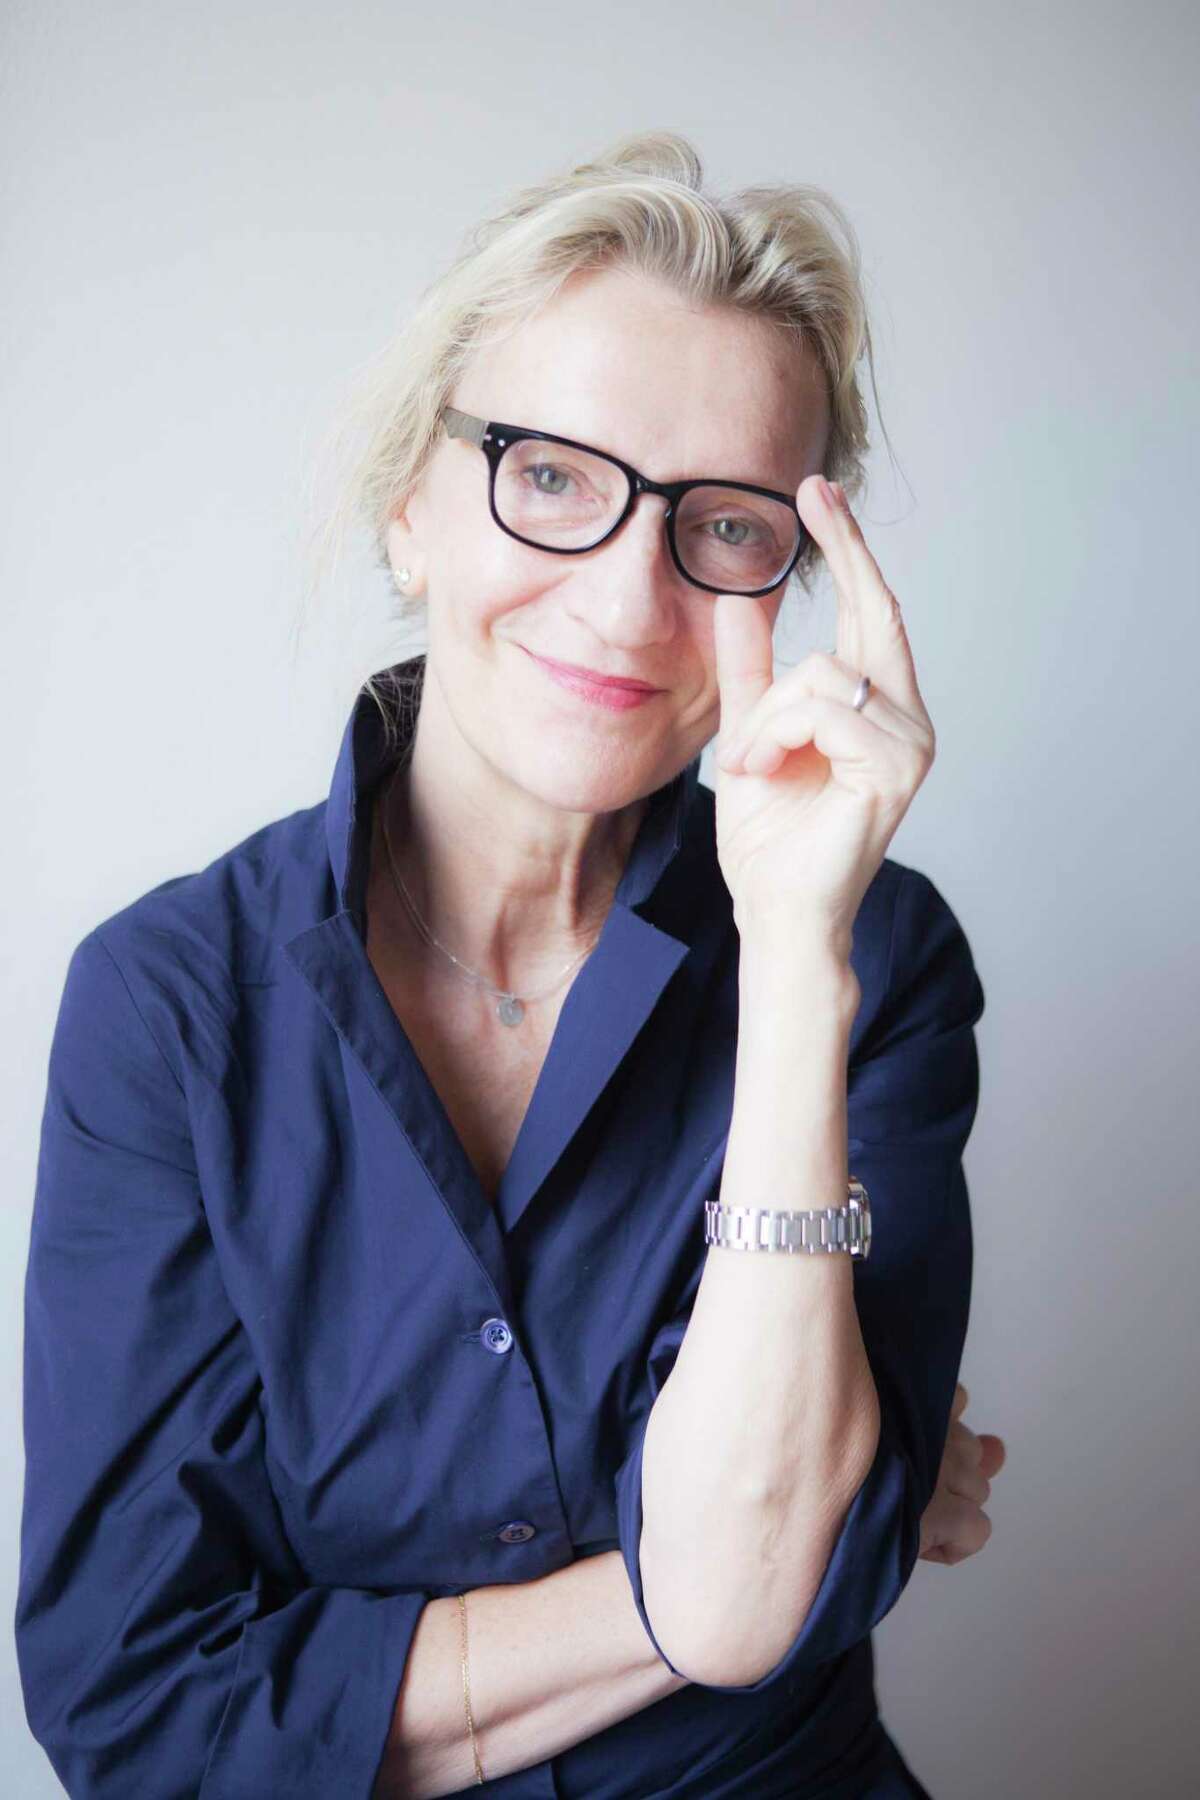 Elizabeth Strout, author of "Lucy by the Sea"